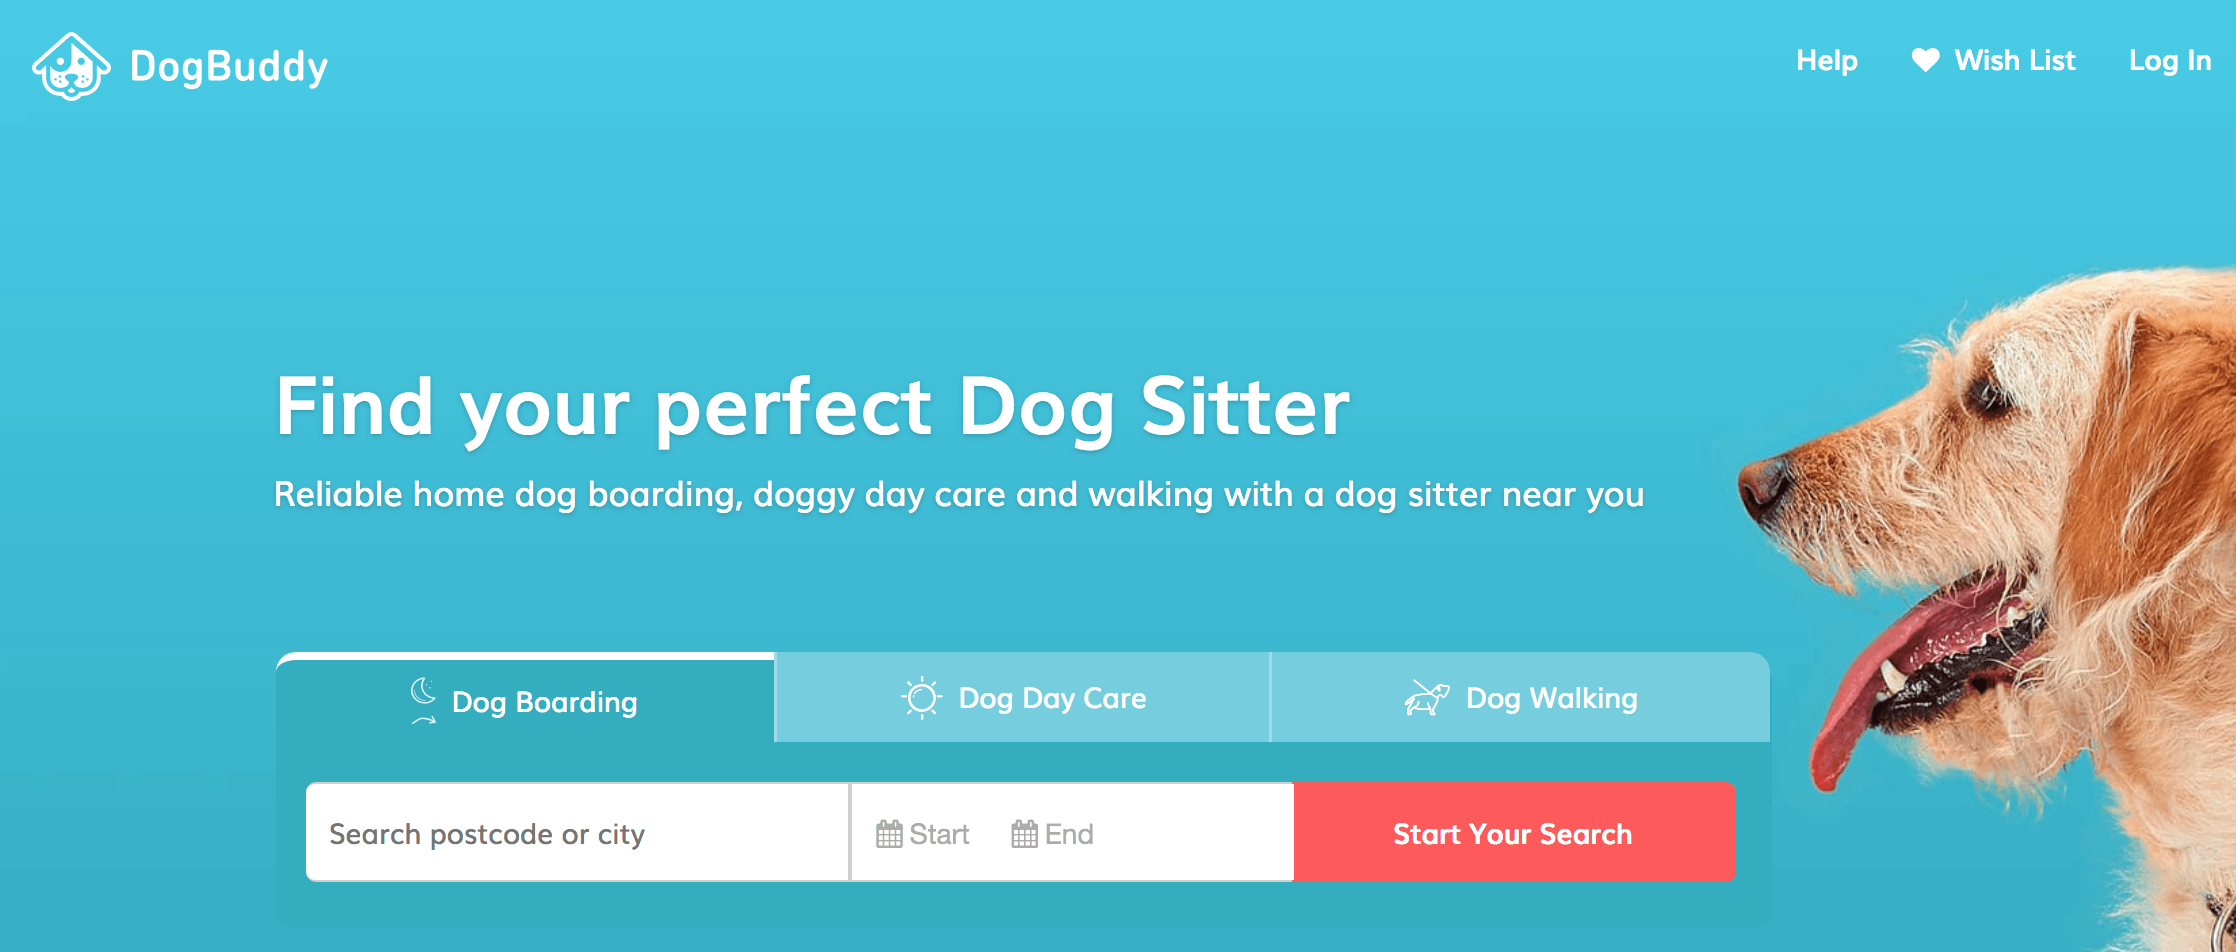 Rover Dog Sitting Logo - Pet care company Rover aims to boost growth in Europe, acquiring UK